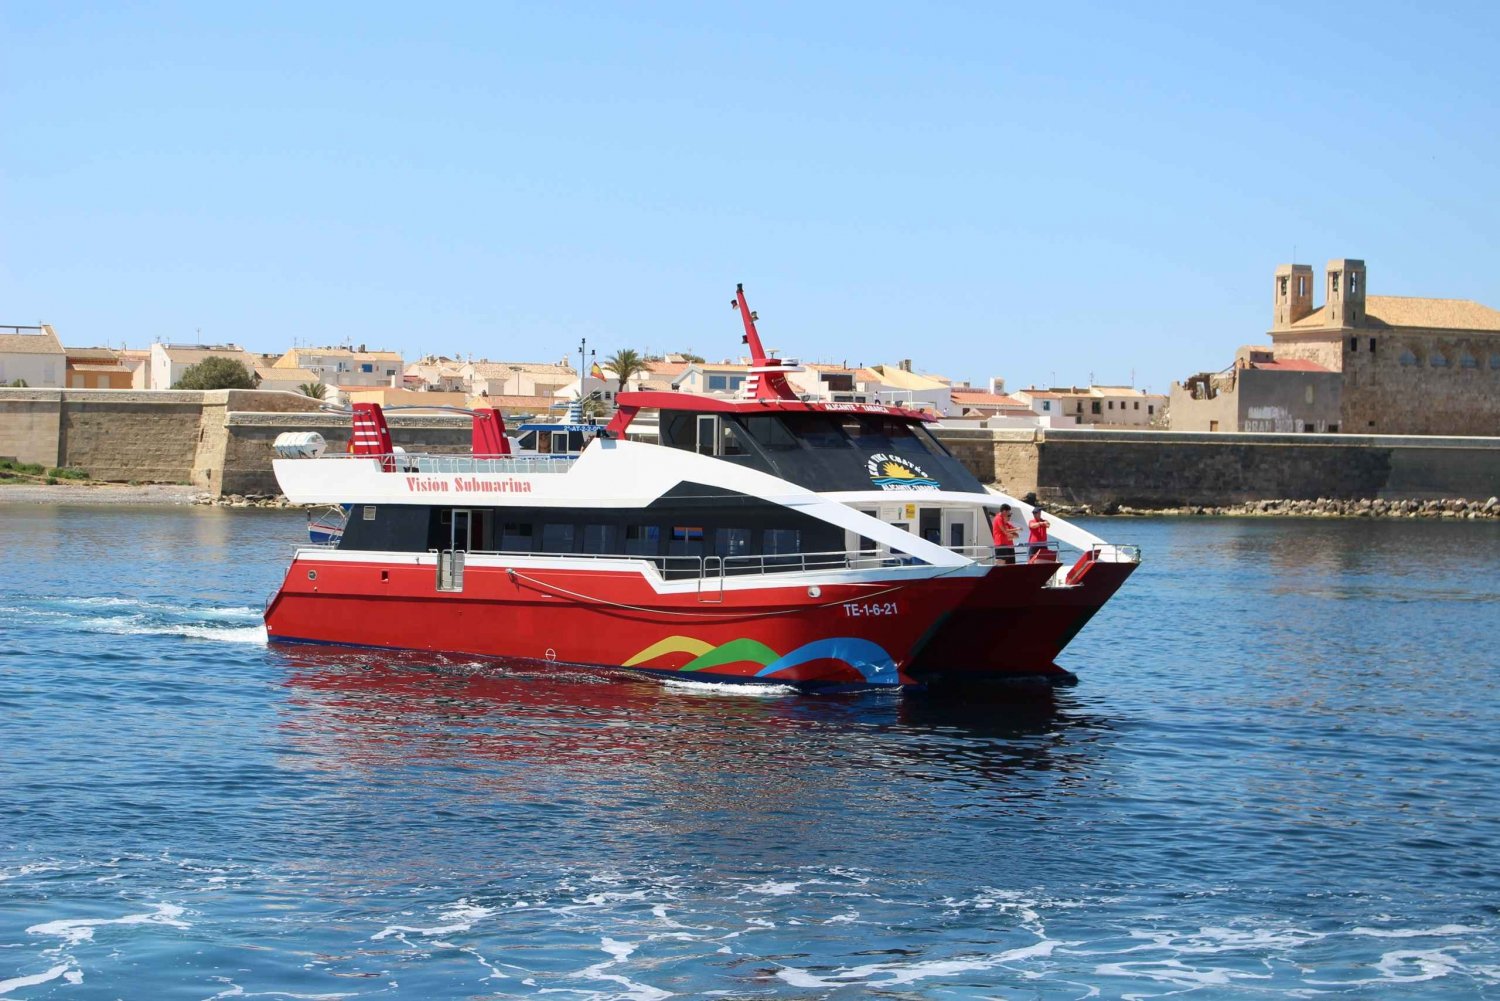 Taking-a-Boat-Trip-to-Tabarca-Island